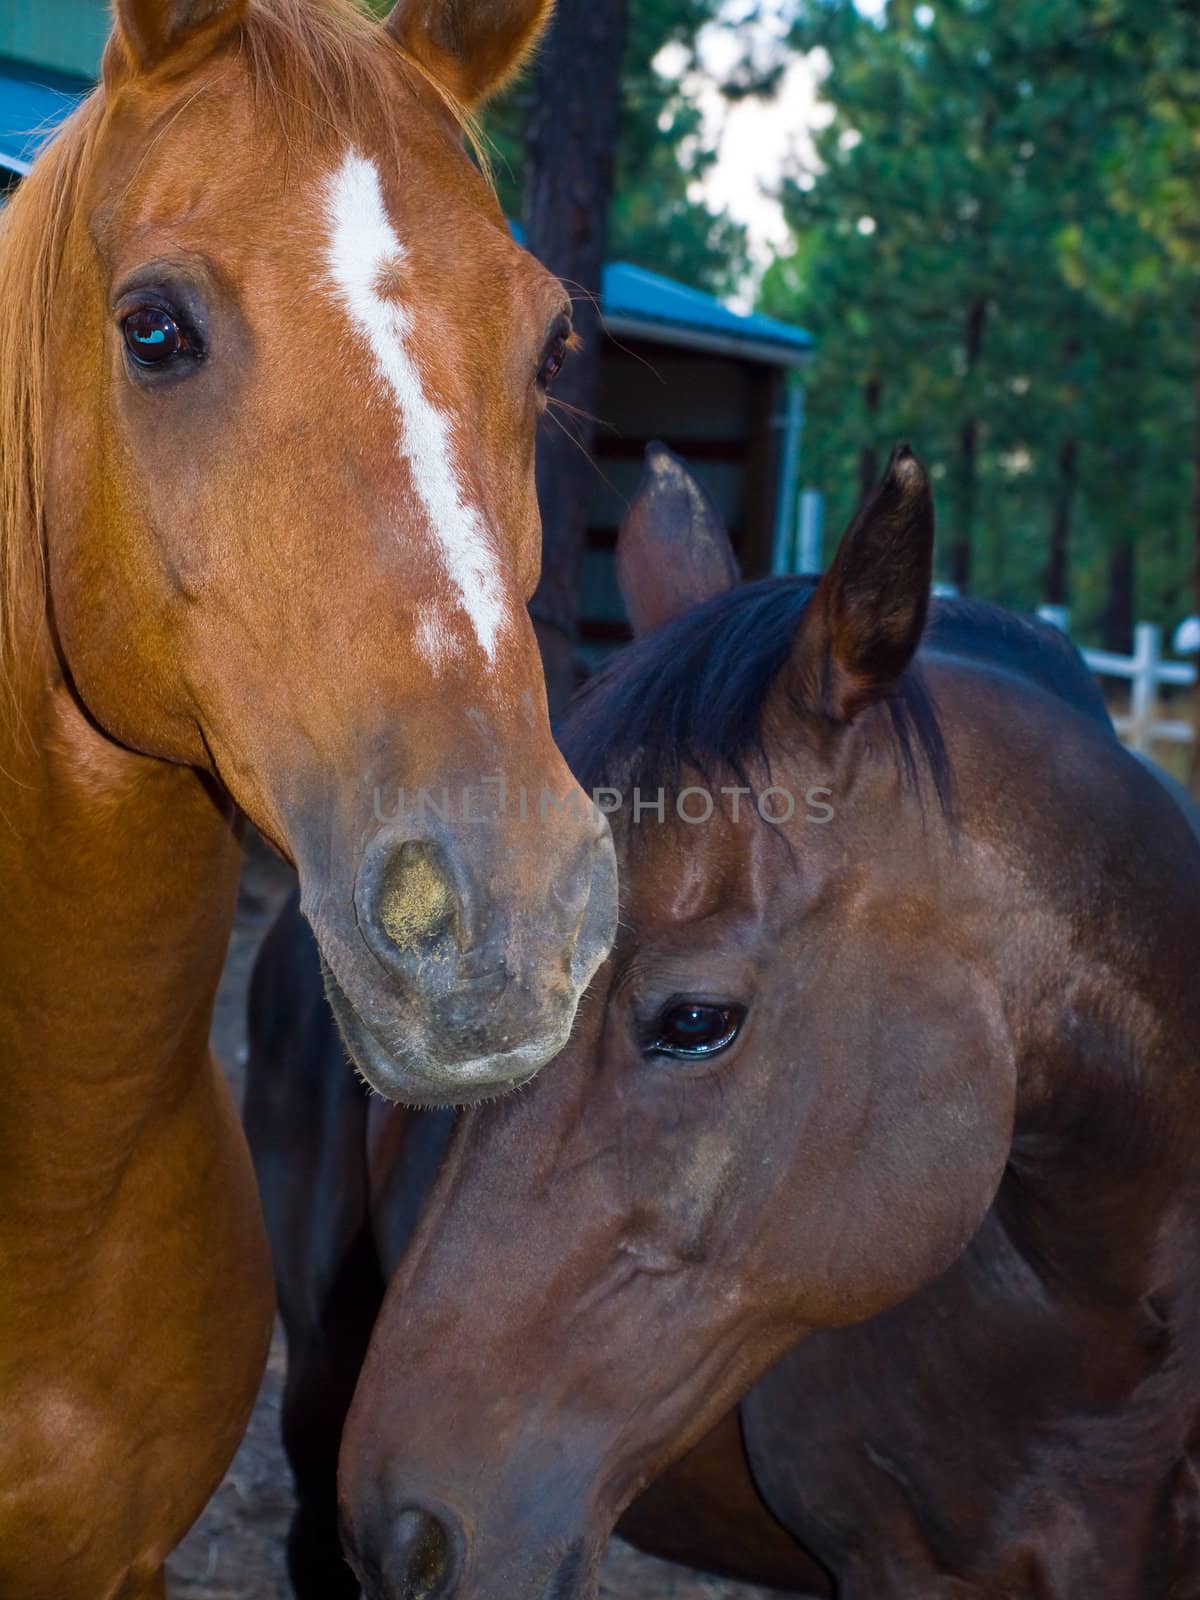 Two Horse Portraits in the Evening Hour